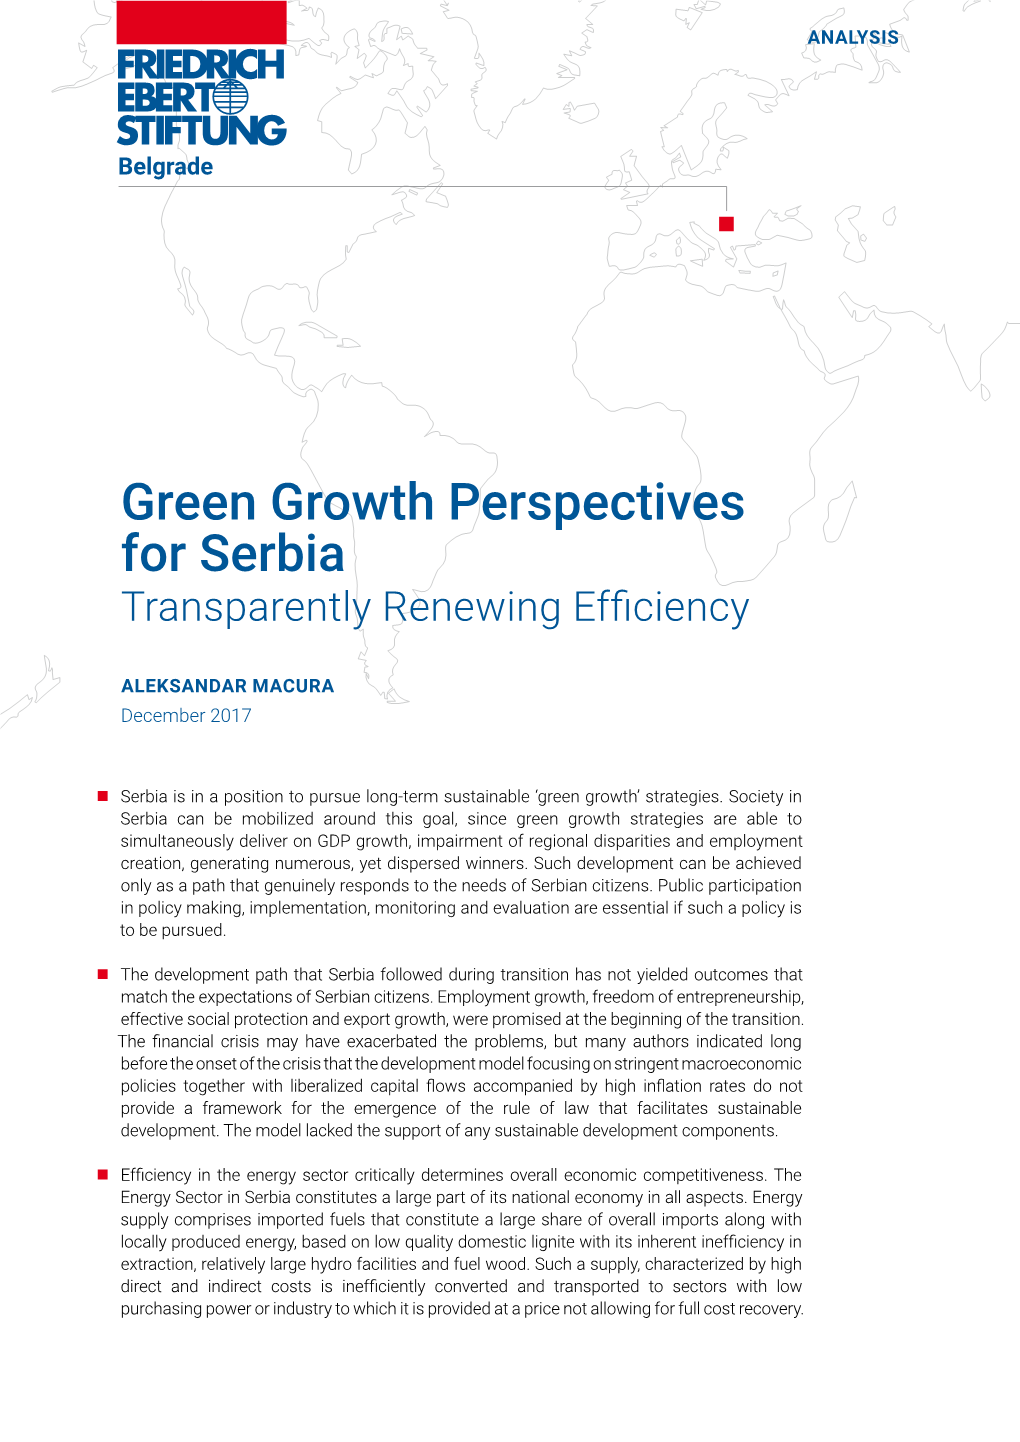 Green Growth Perspectives for Serbia Transparently Renewing Efficiency